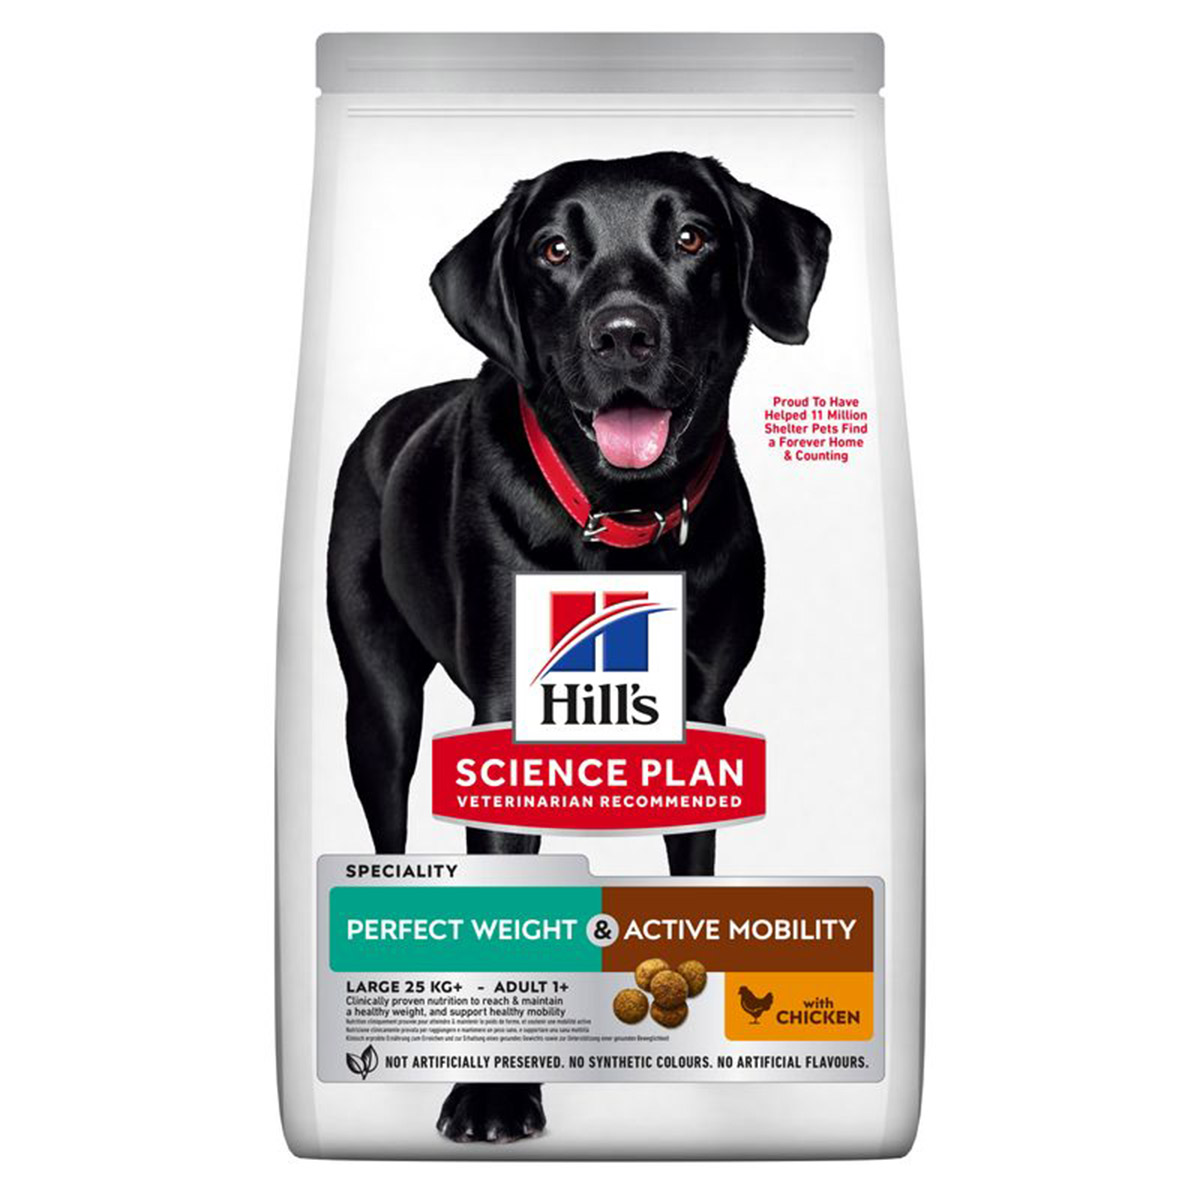 Hill's Science Plan Perfect Weight pro psy + Active Mobility Large Breed Adult kuřecí, 12k g